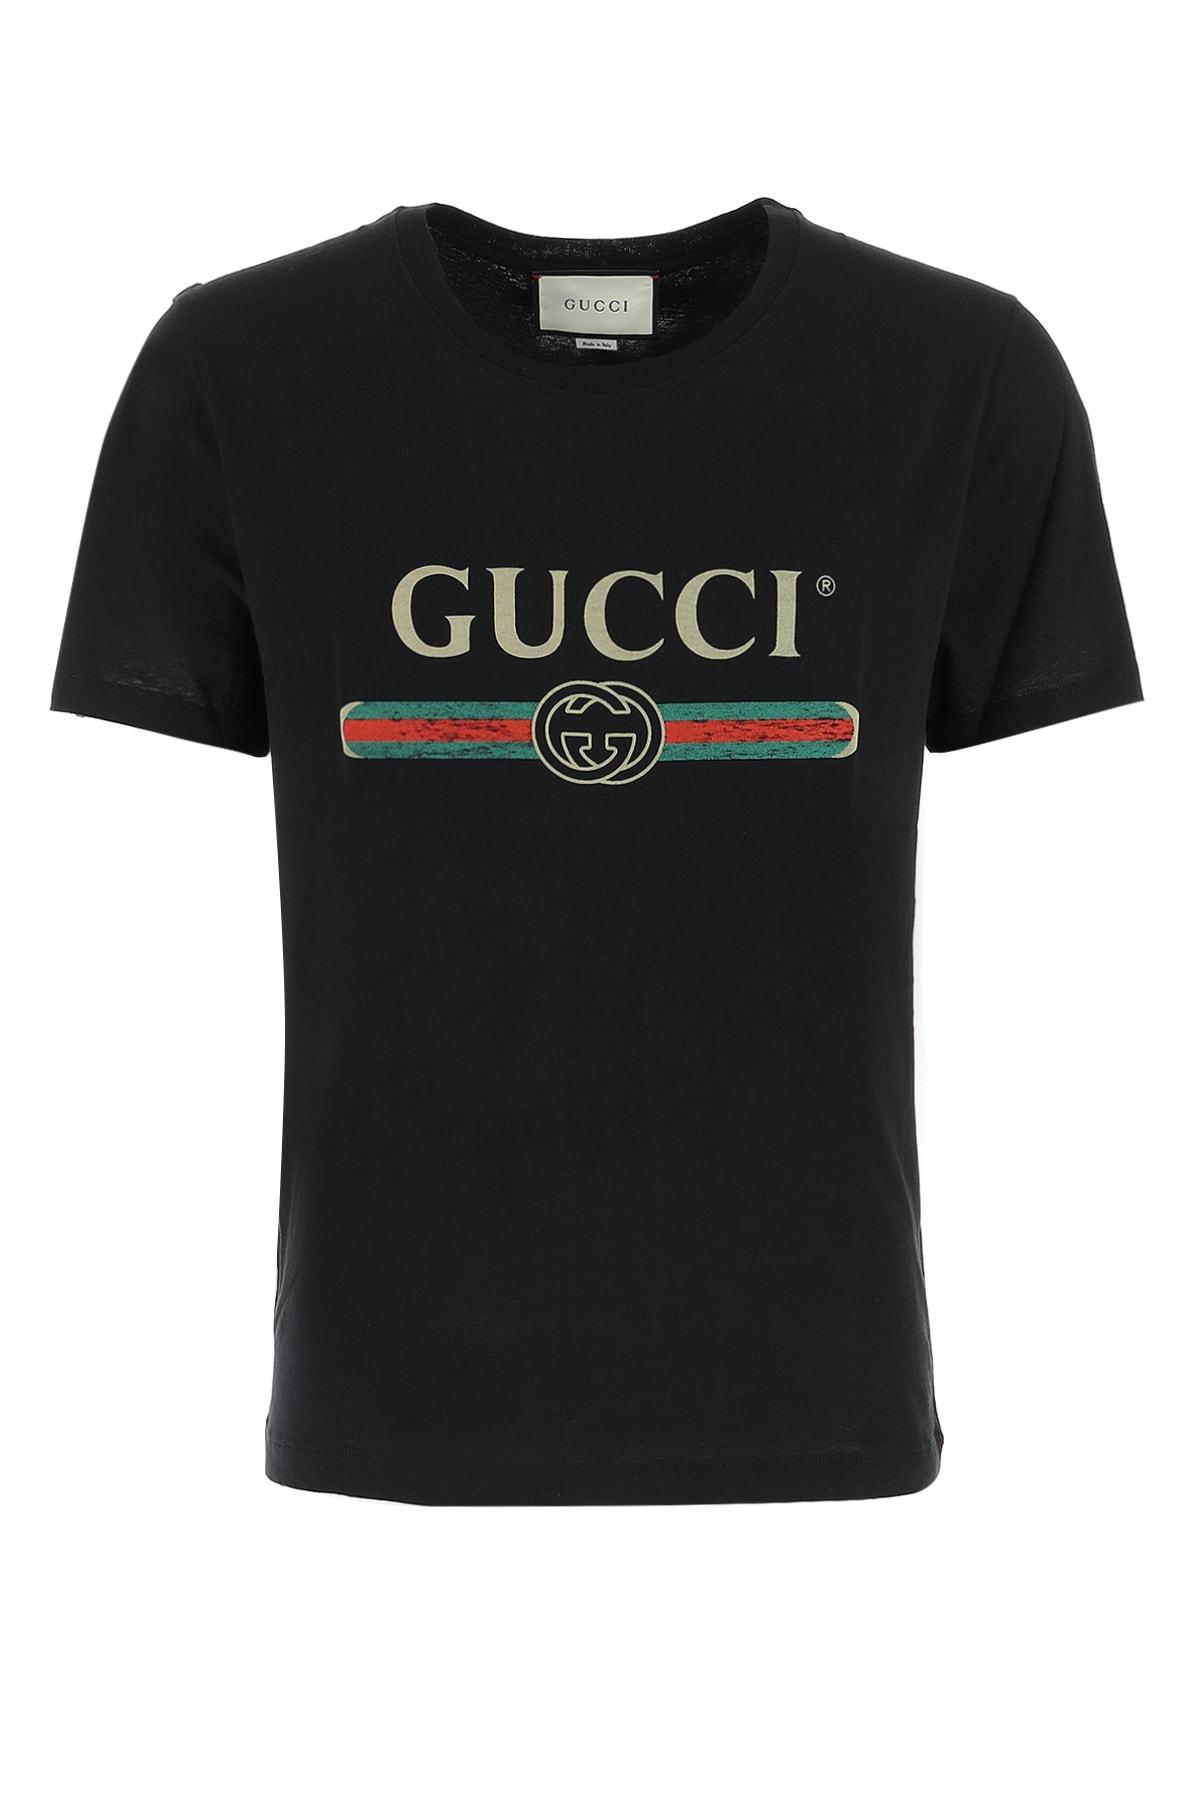 Gucci Cotton Distressed Fake Logo T Shirt in Black for Men - Save 37% |  Lyst Canada